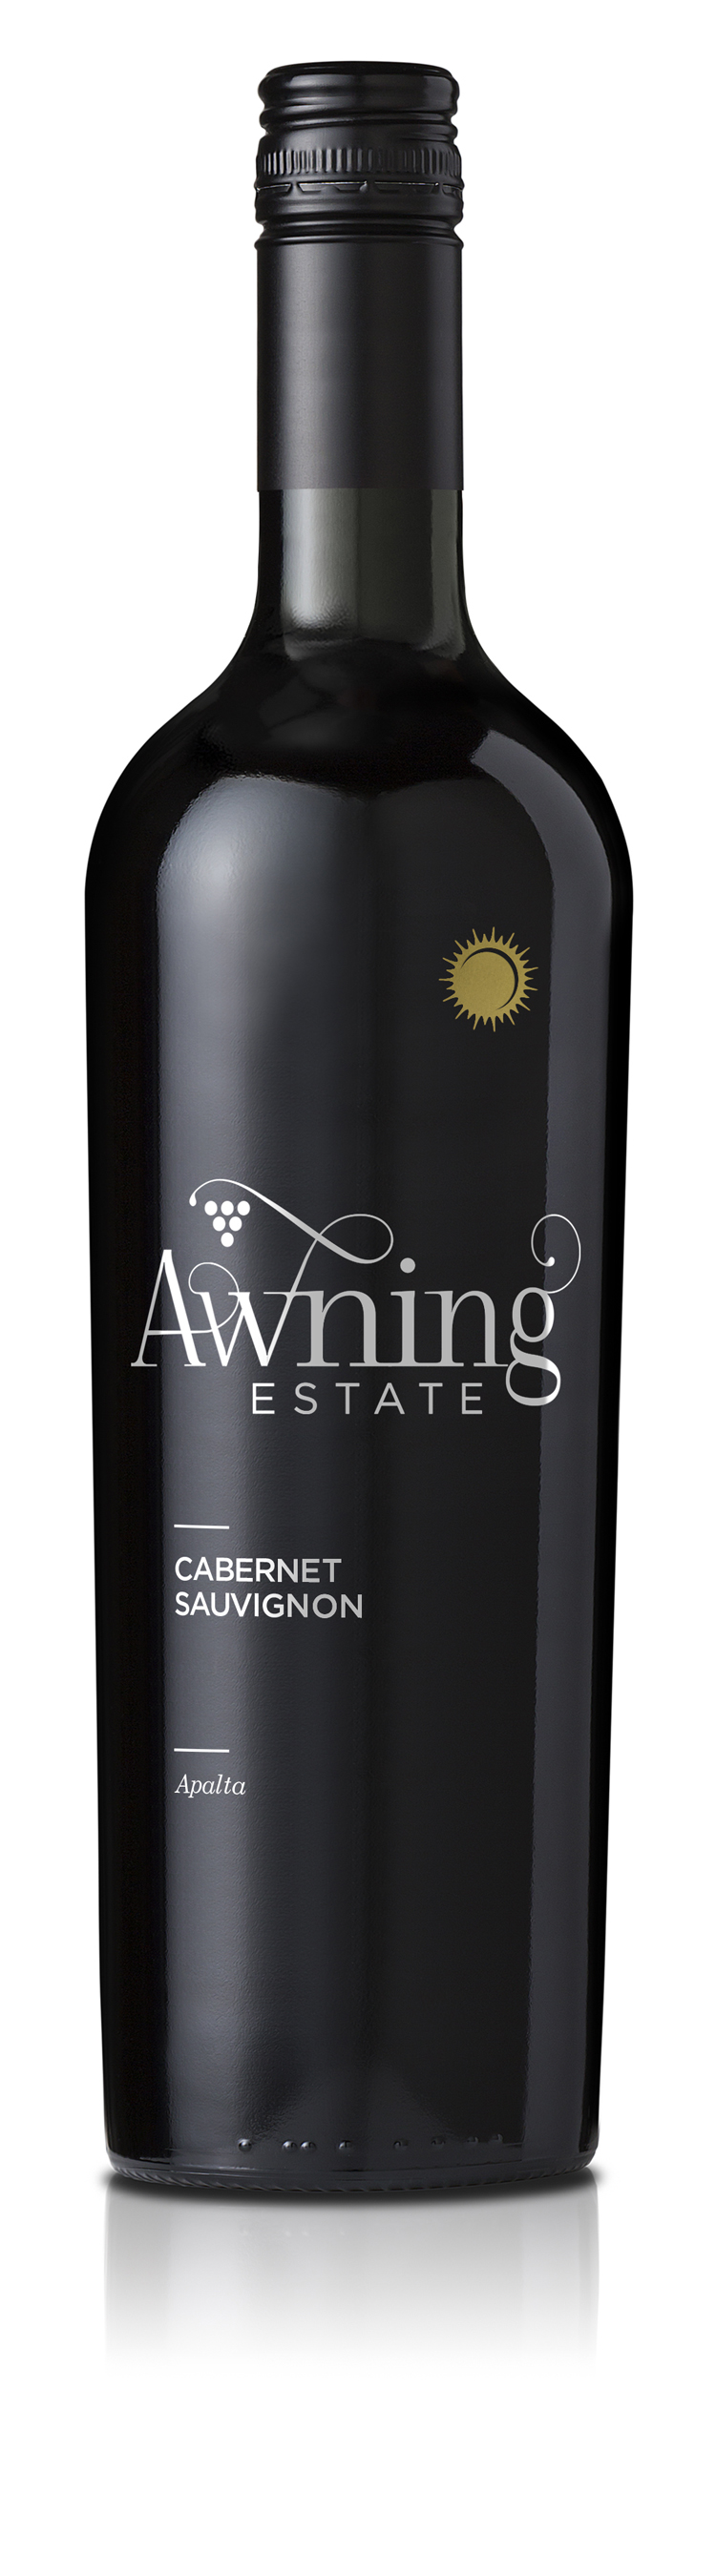 Awning Estate is one of the only Cabernet Sauvignons available from Chile's iconic Apalta region for less than $20